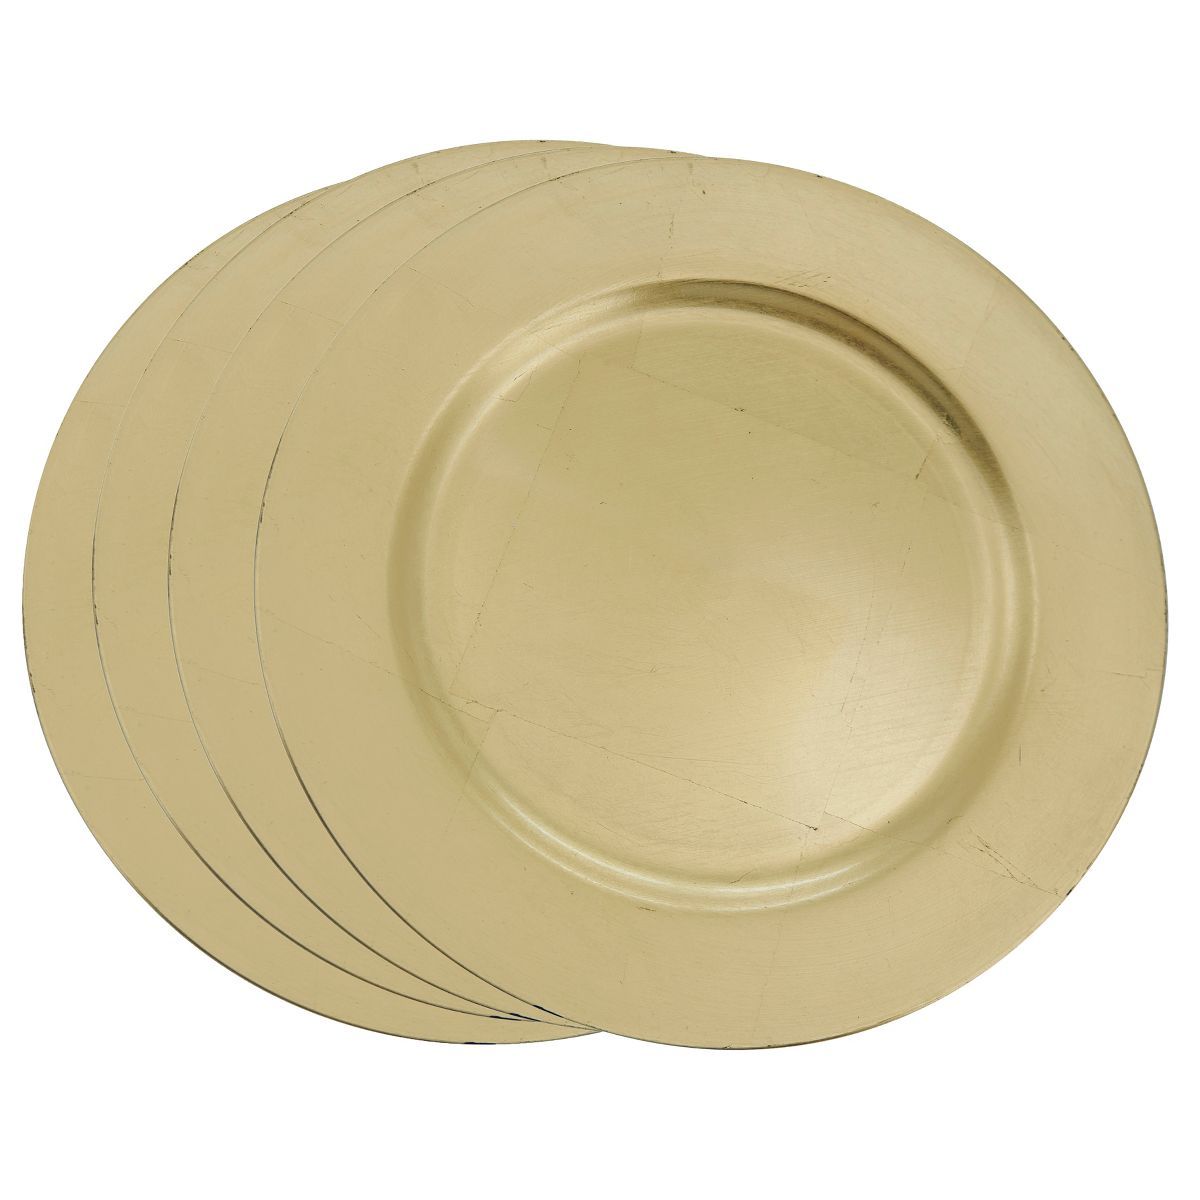 Saro Lifestyle Classic Solid Color Charger Plates | Target